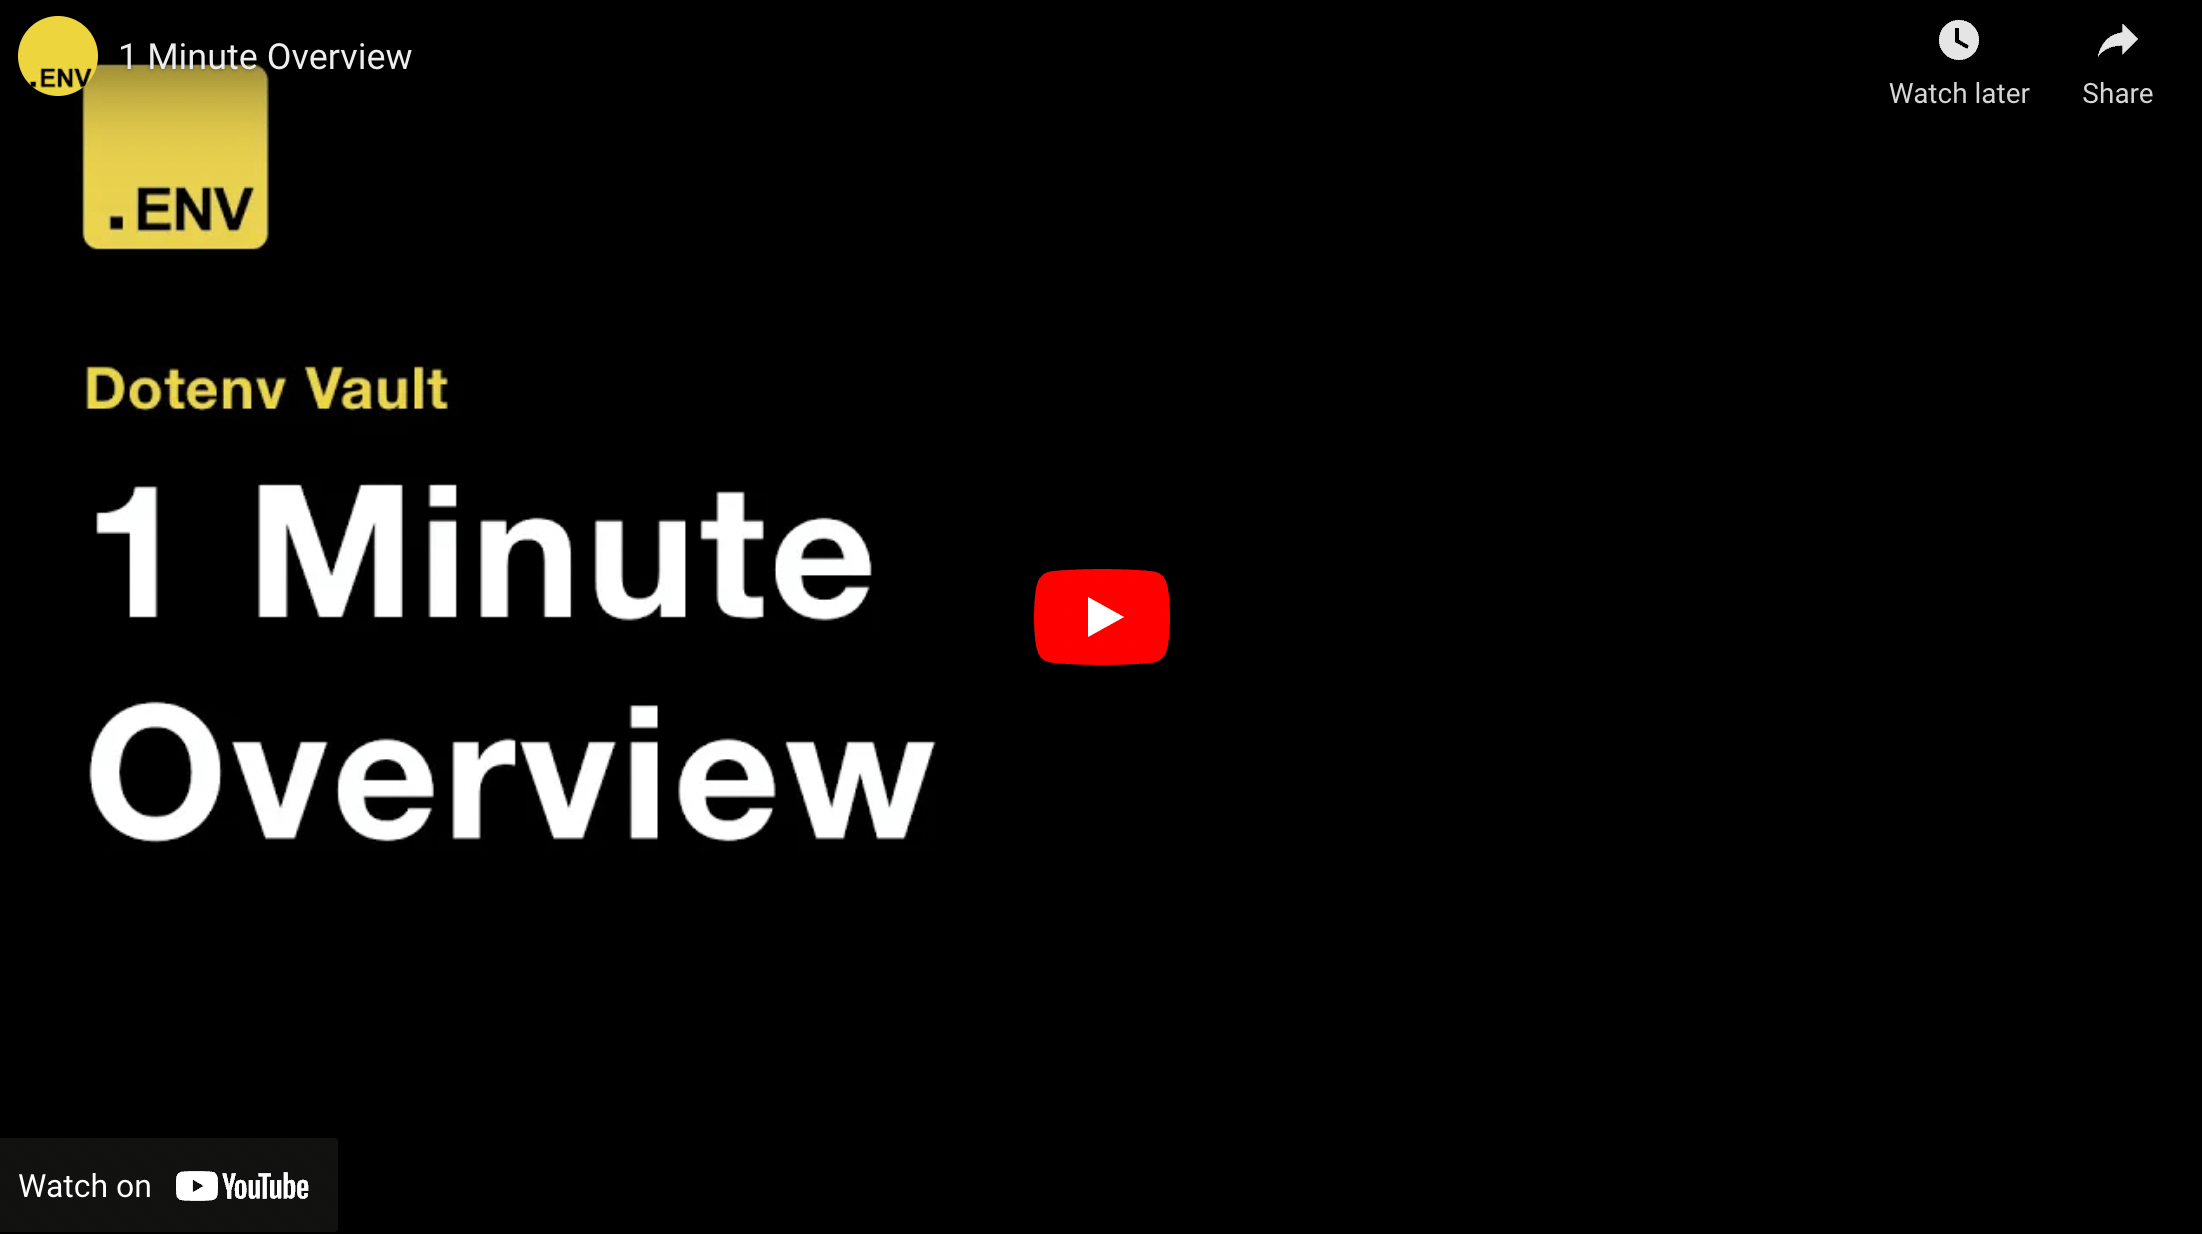 1 Minute Overview